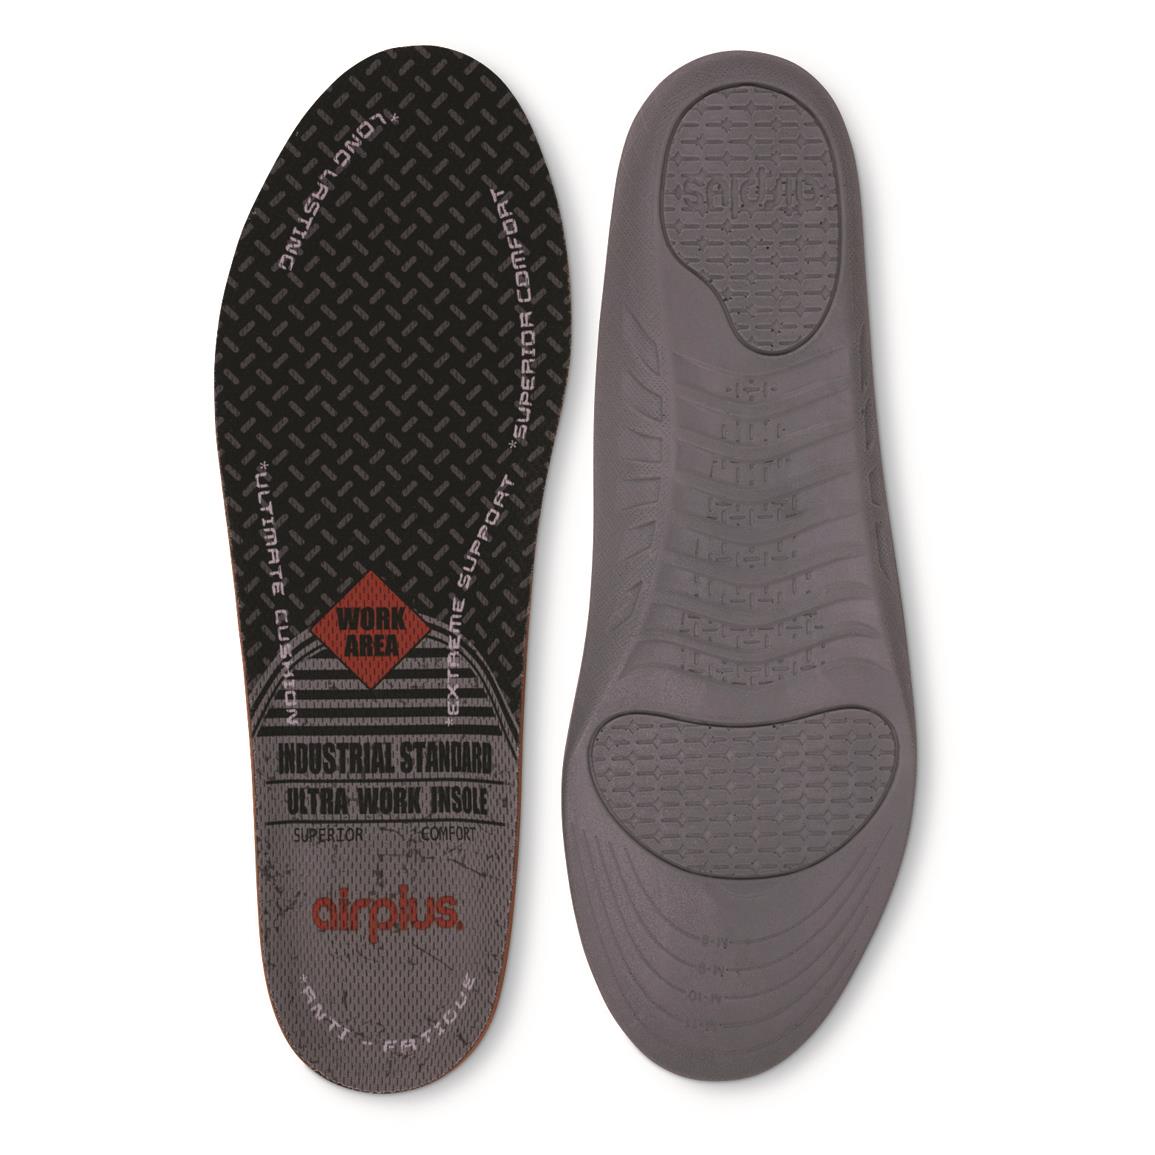 Airplus Ultra Work Memory Plus Insole